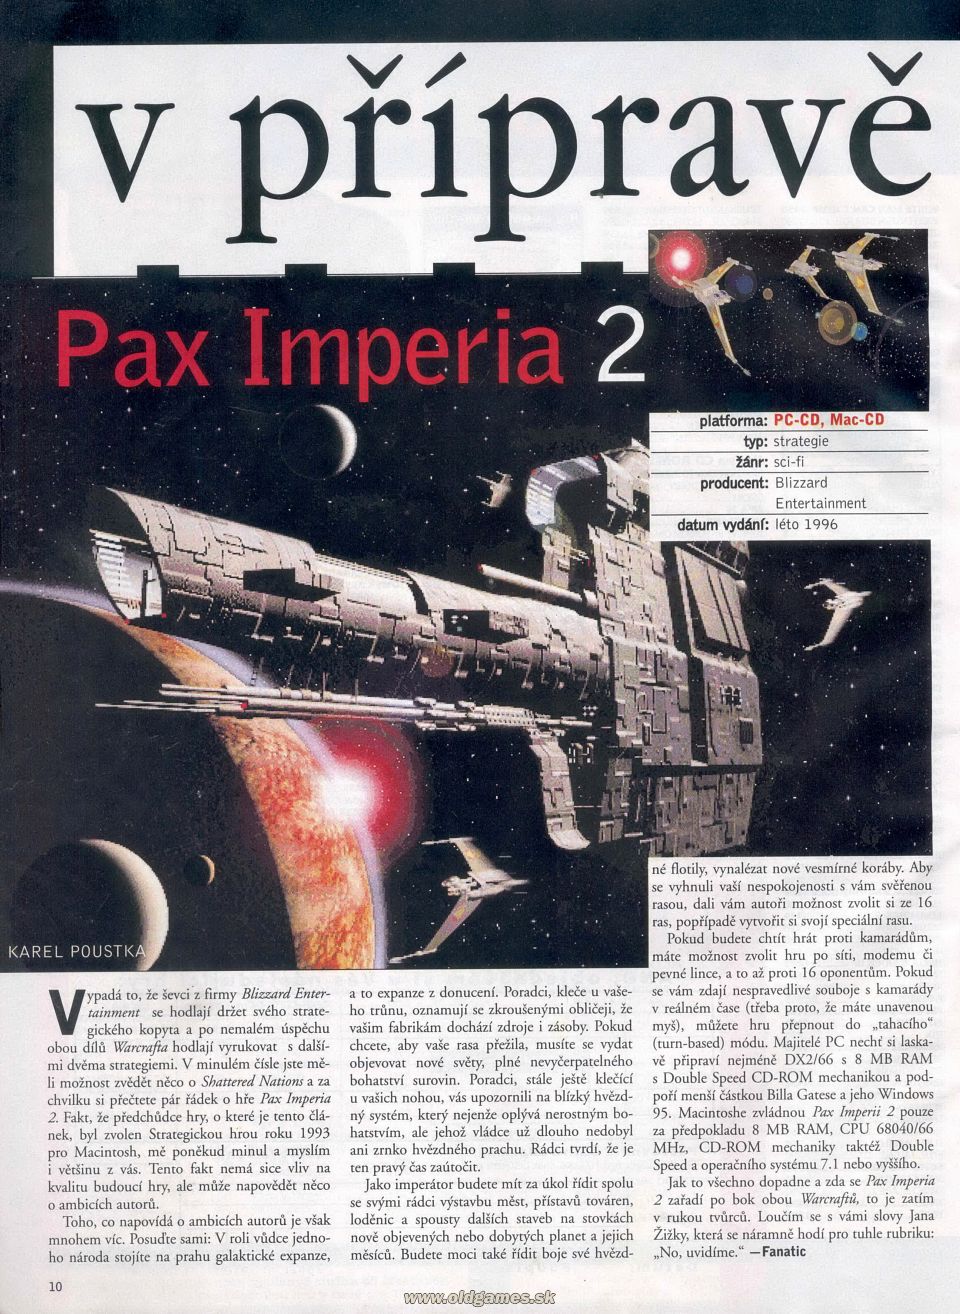 Preview: Pax Imperia 2